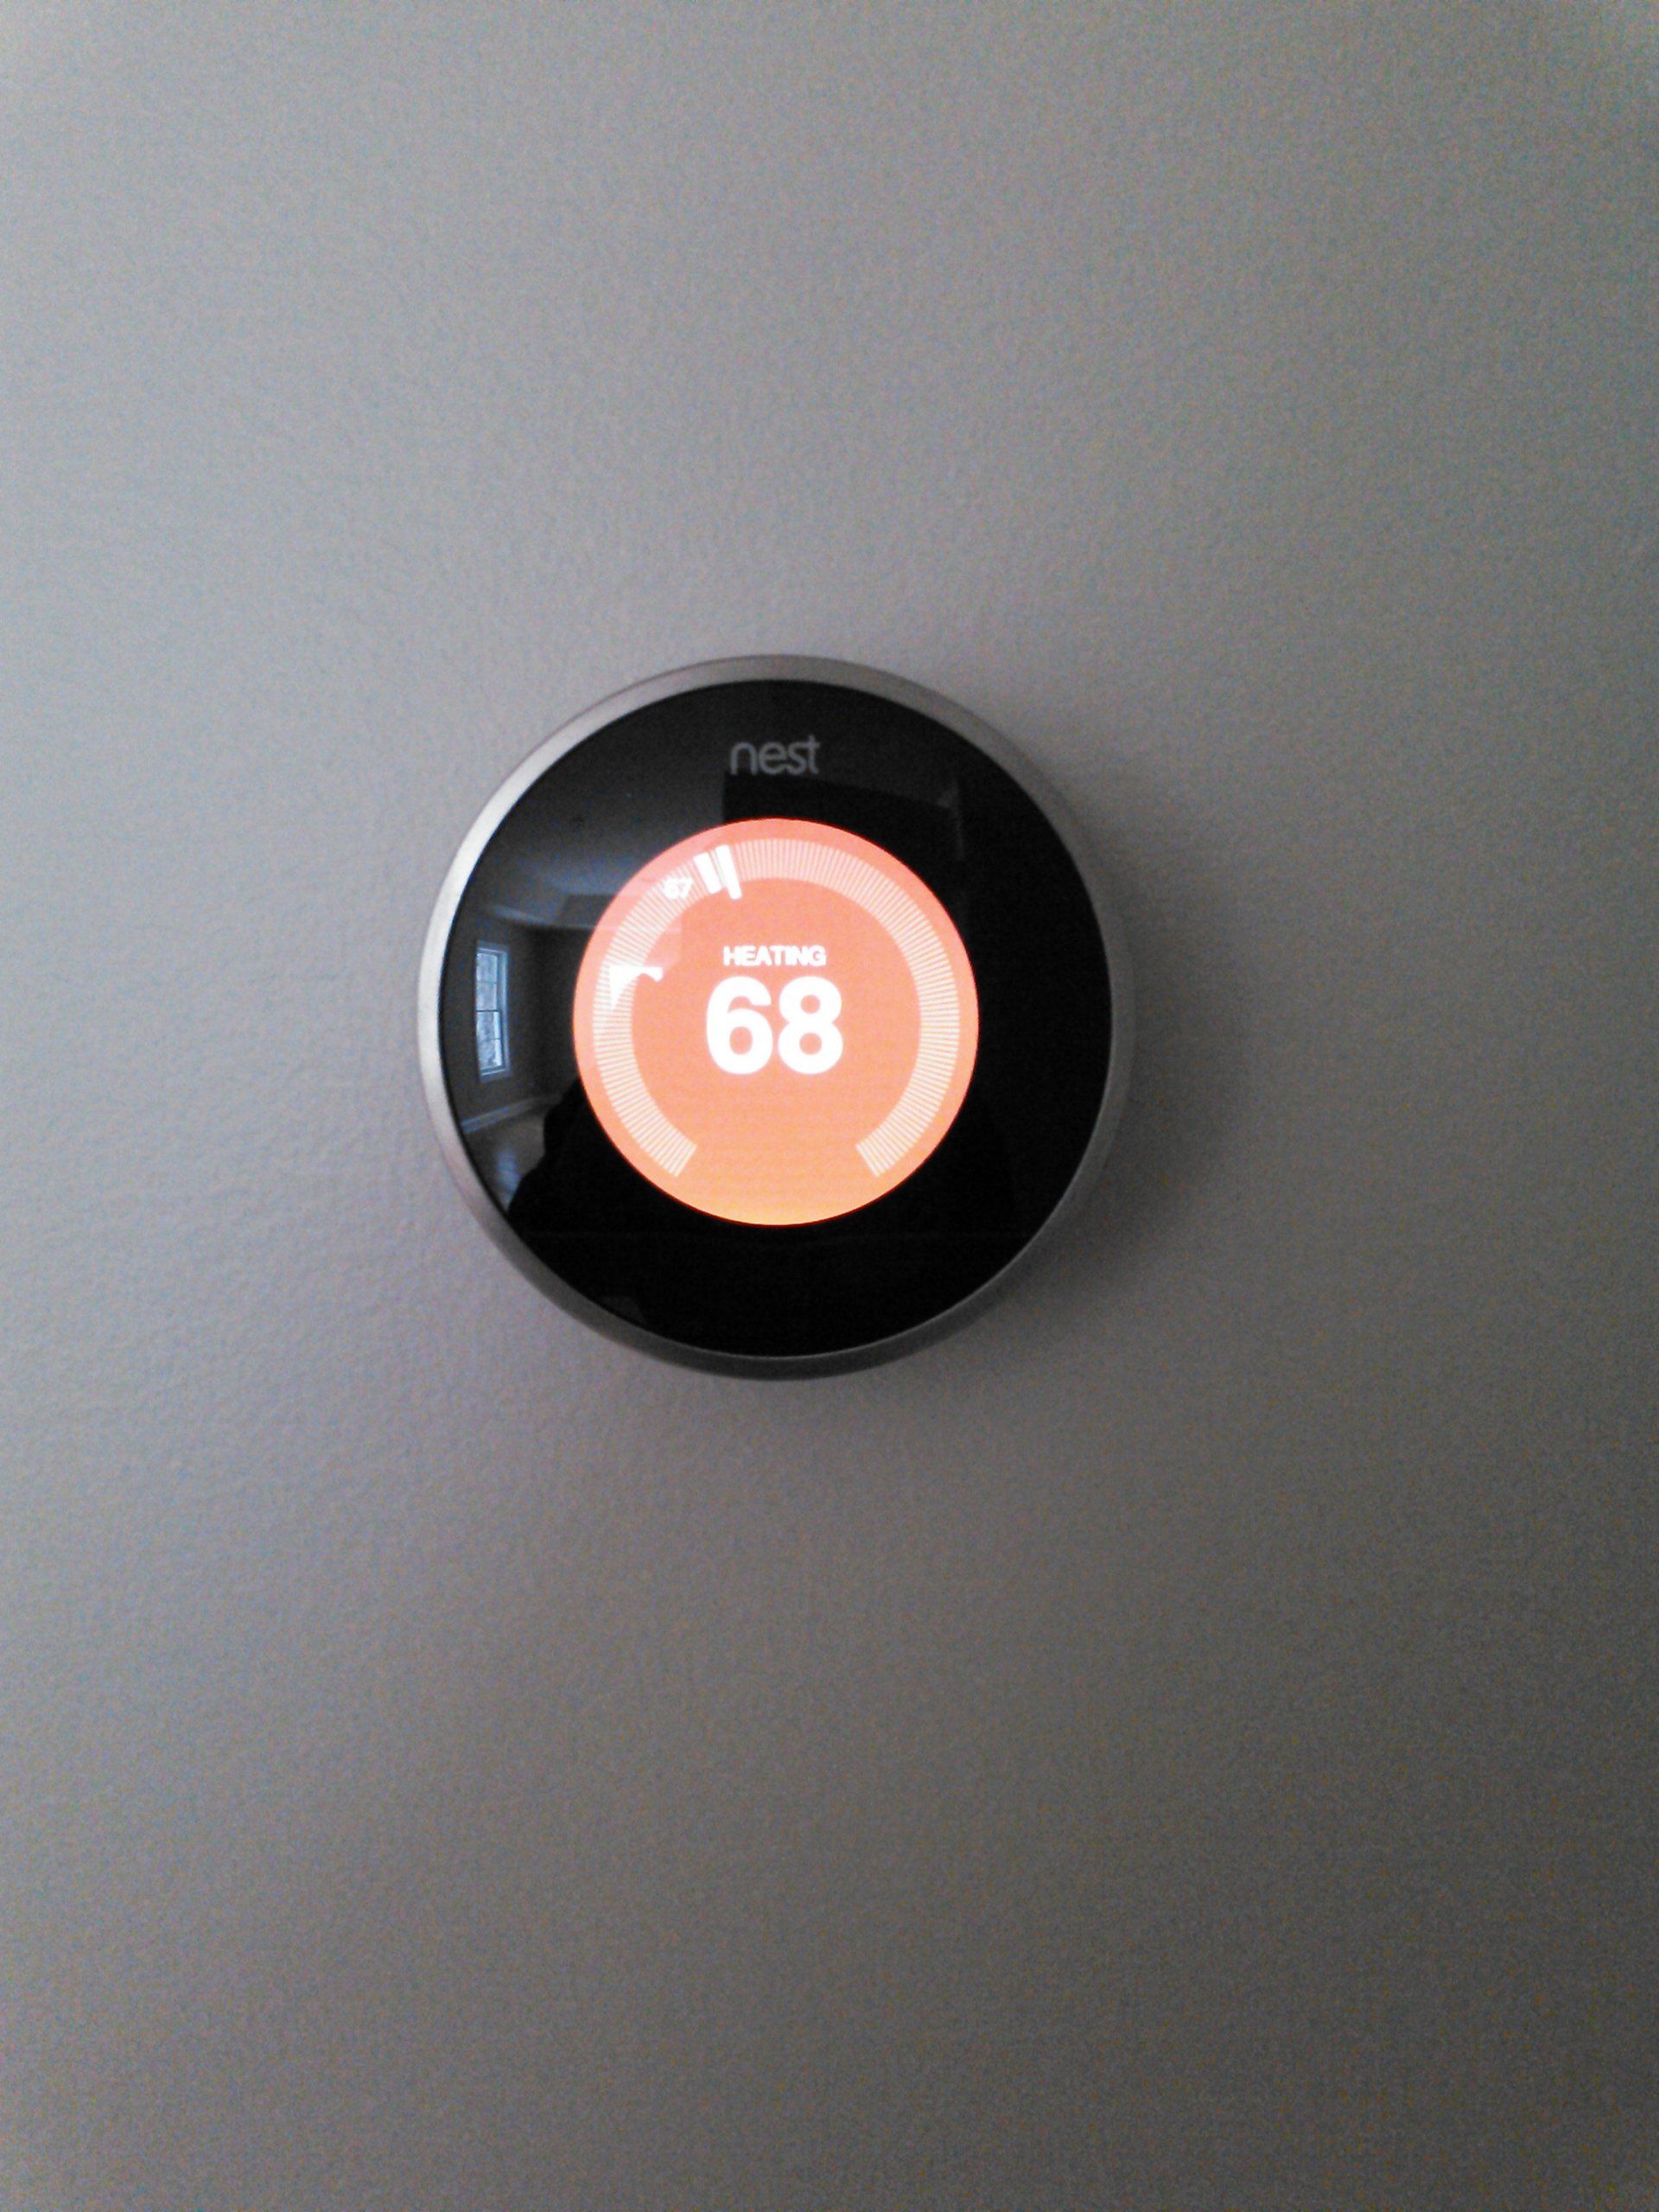 nest thermostat installed in an Albany, NY home